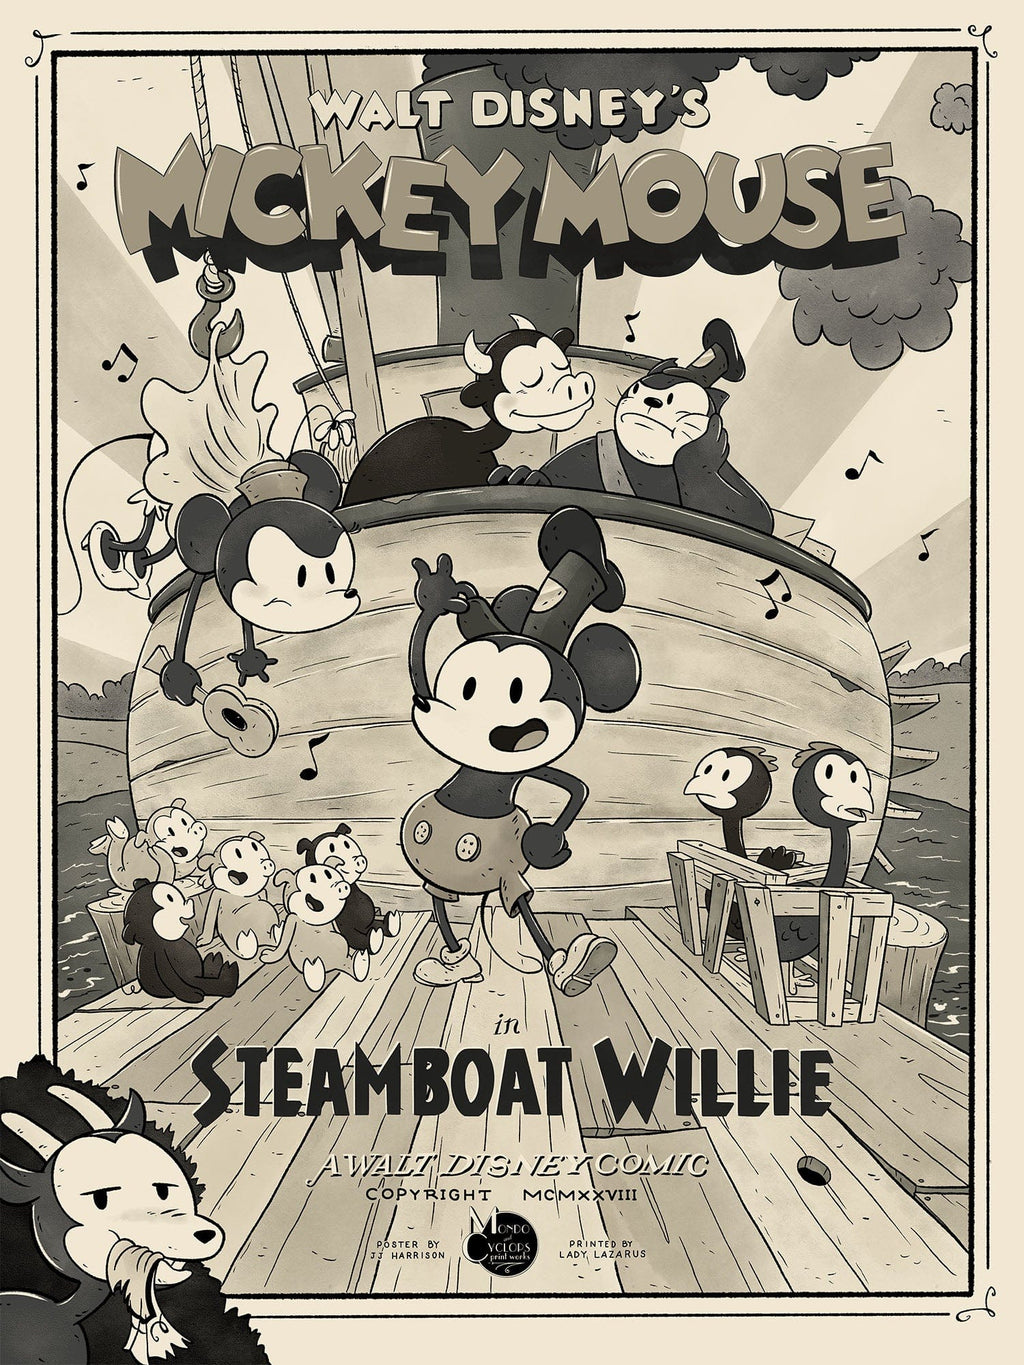 steamboat willie